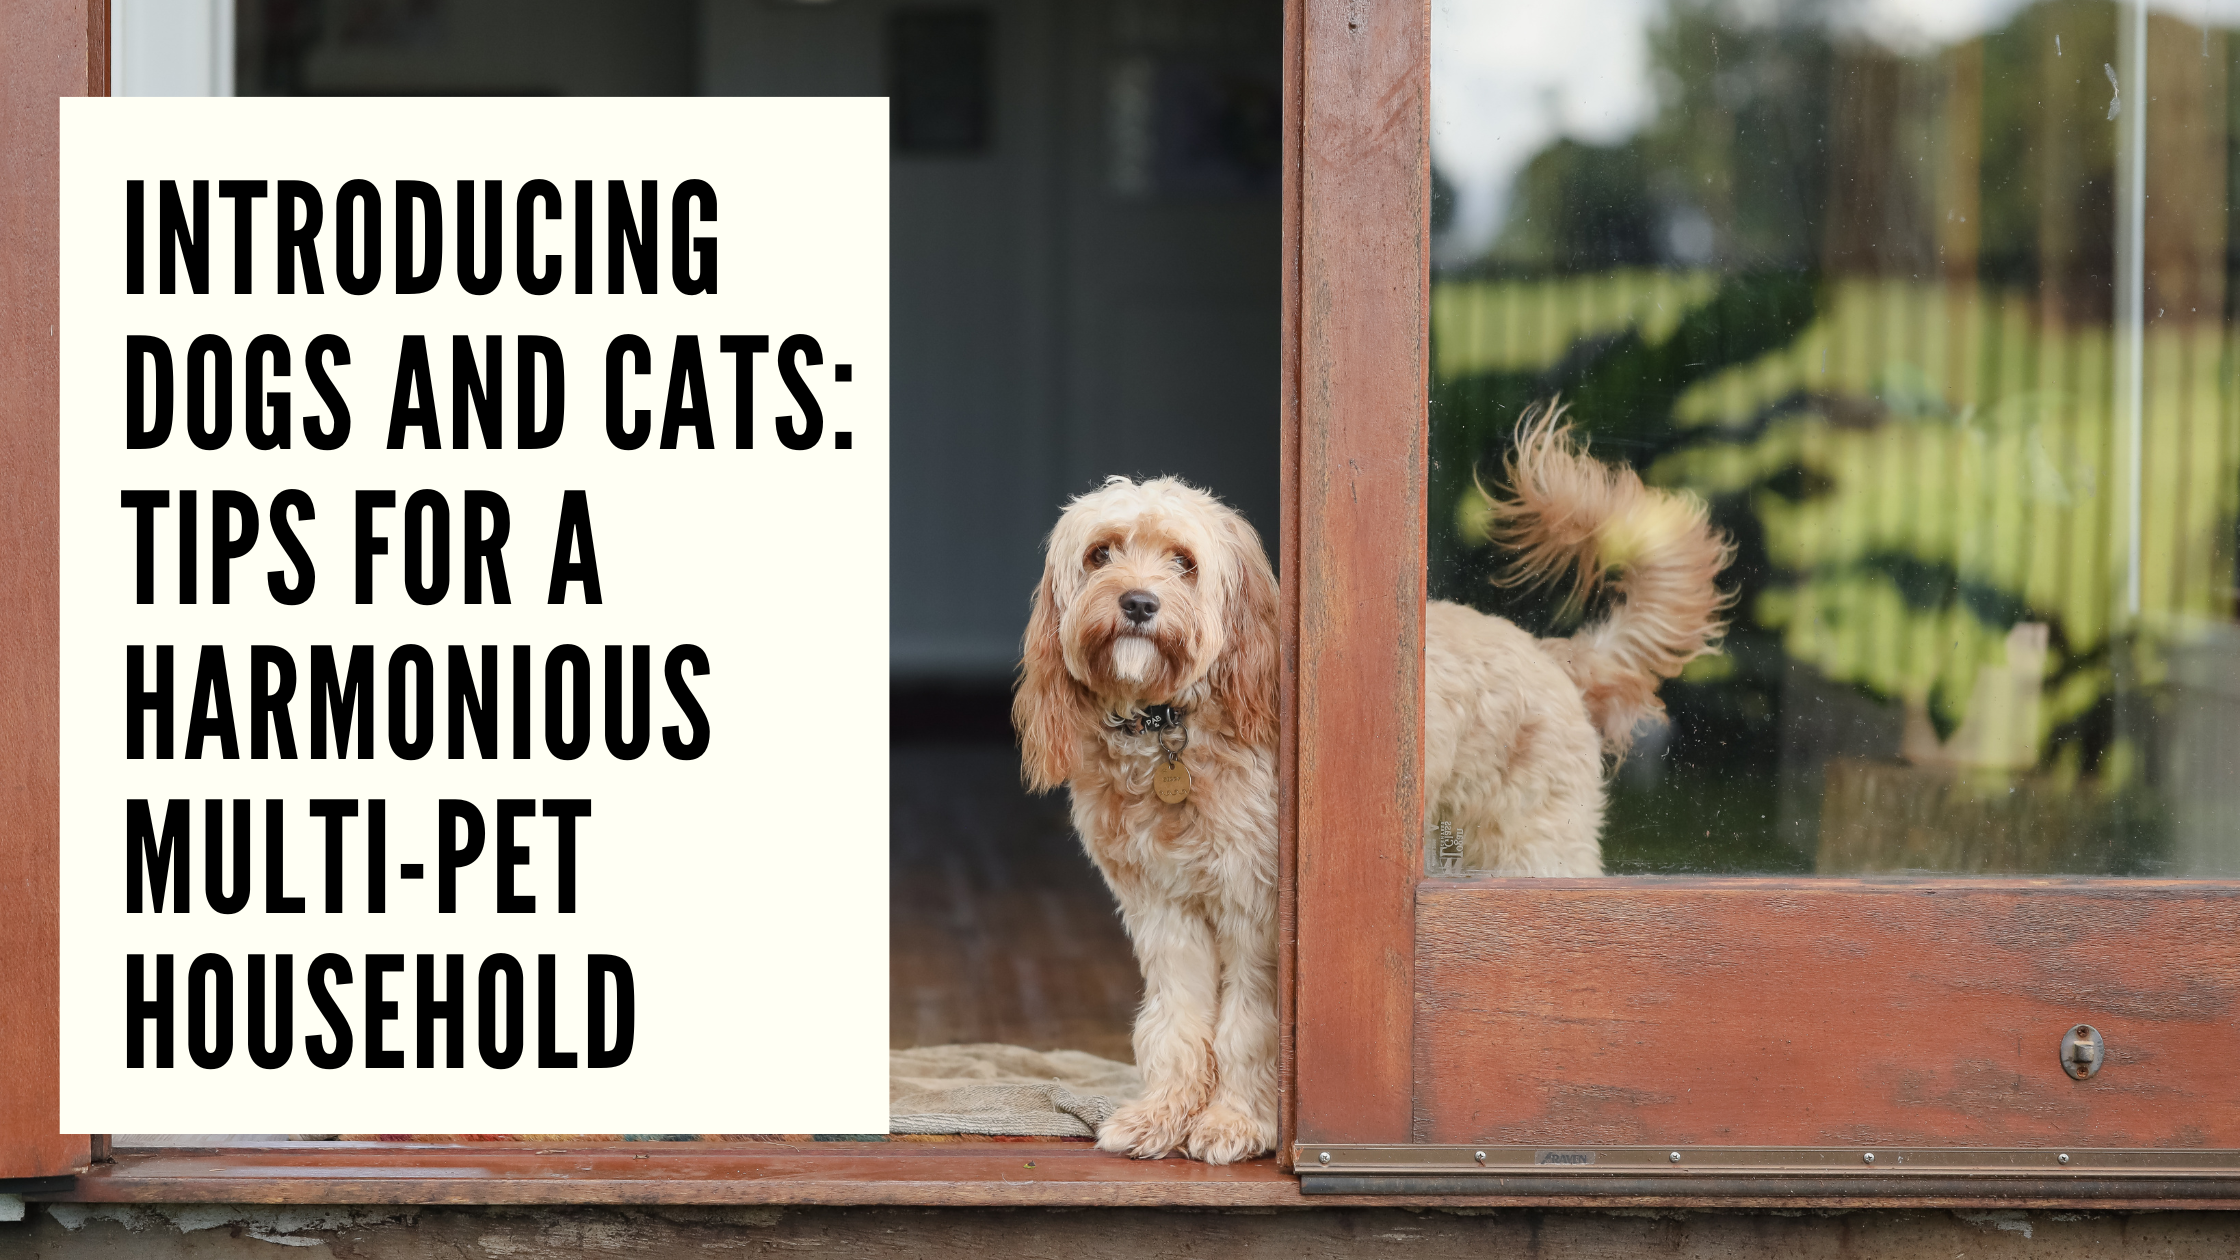 Introducing Dogs and Cats Tips for a Harmonious Multi-Pet Household